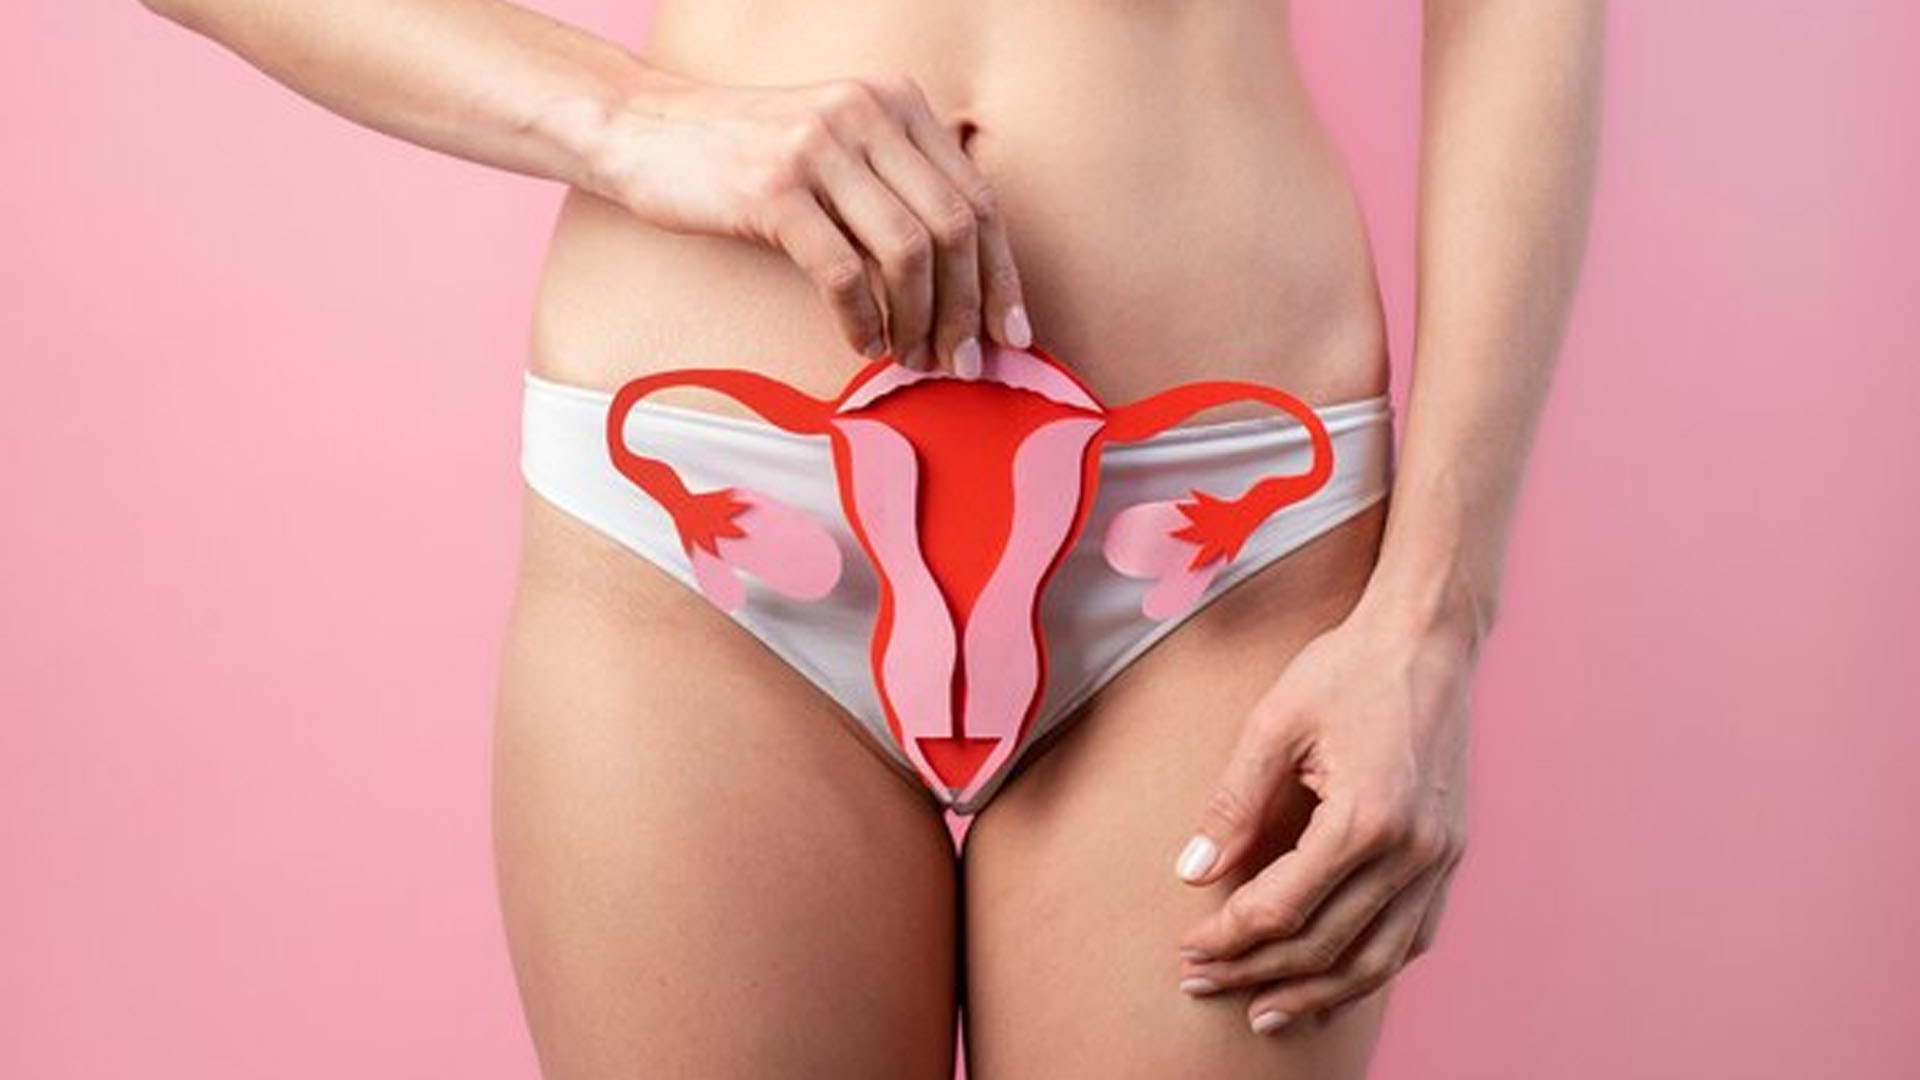 What are the Home Remedies to Tighten Vagina?